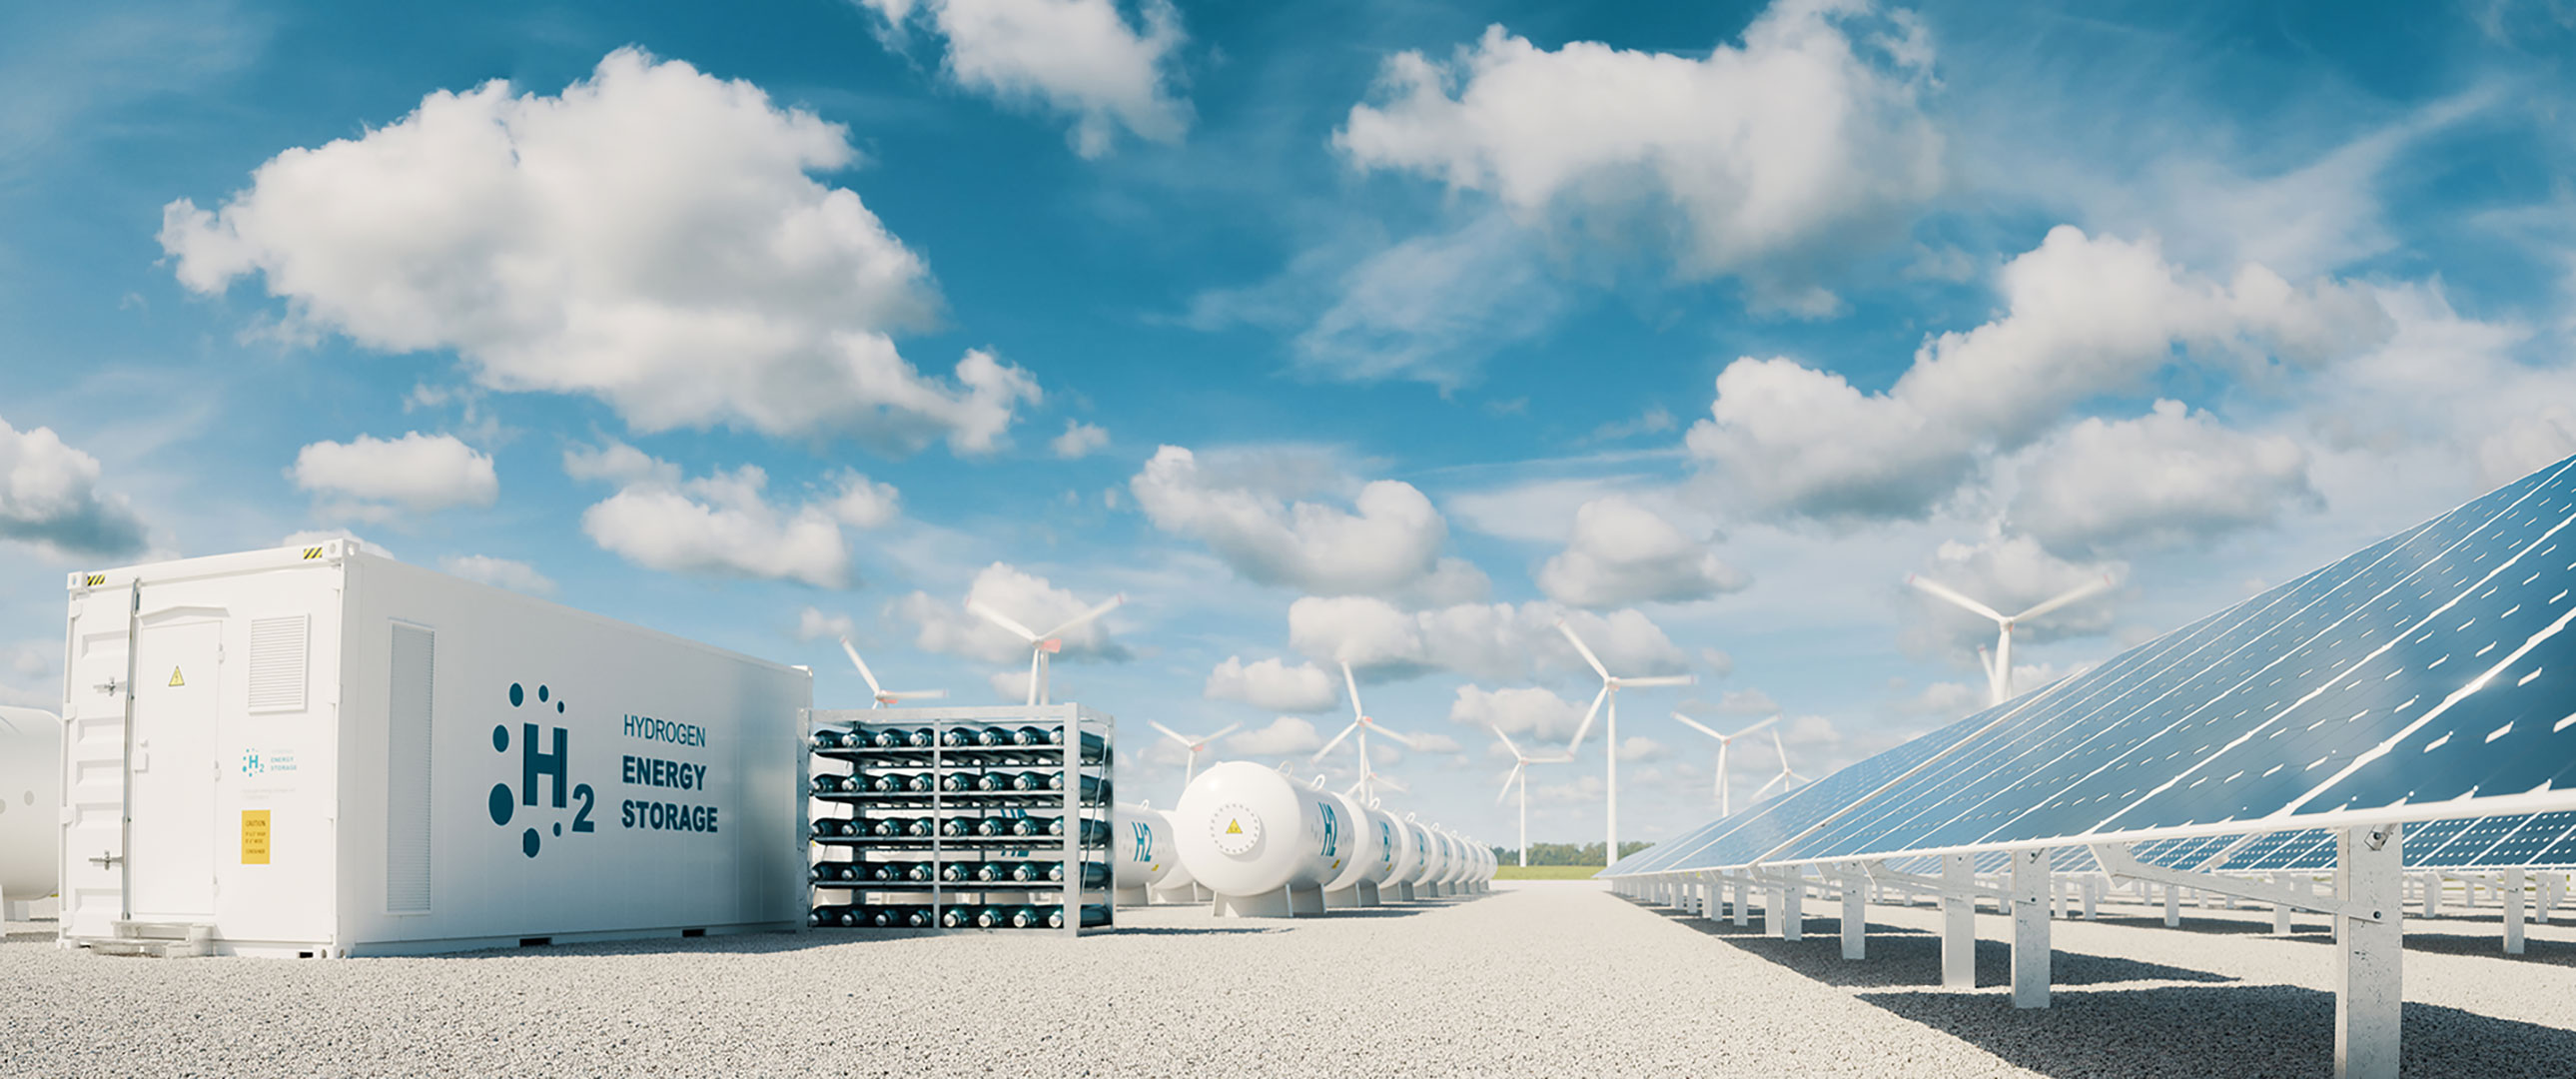 Electrolyzer in a 20-foot container, hydrogen storage and renewable generation systems.